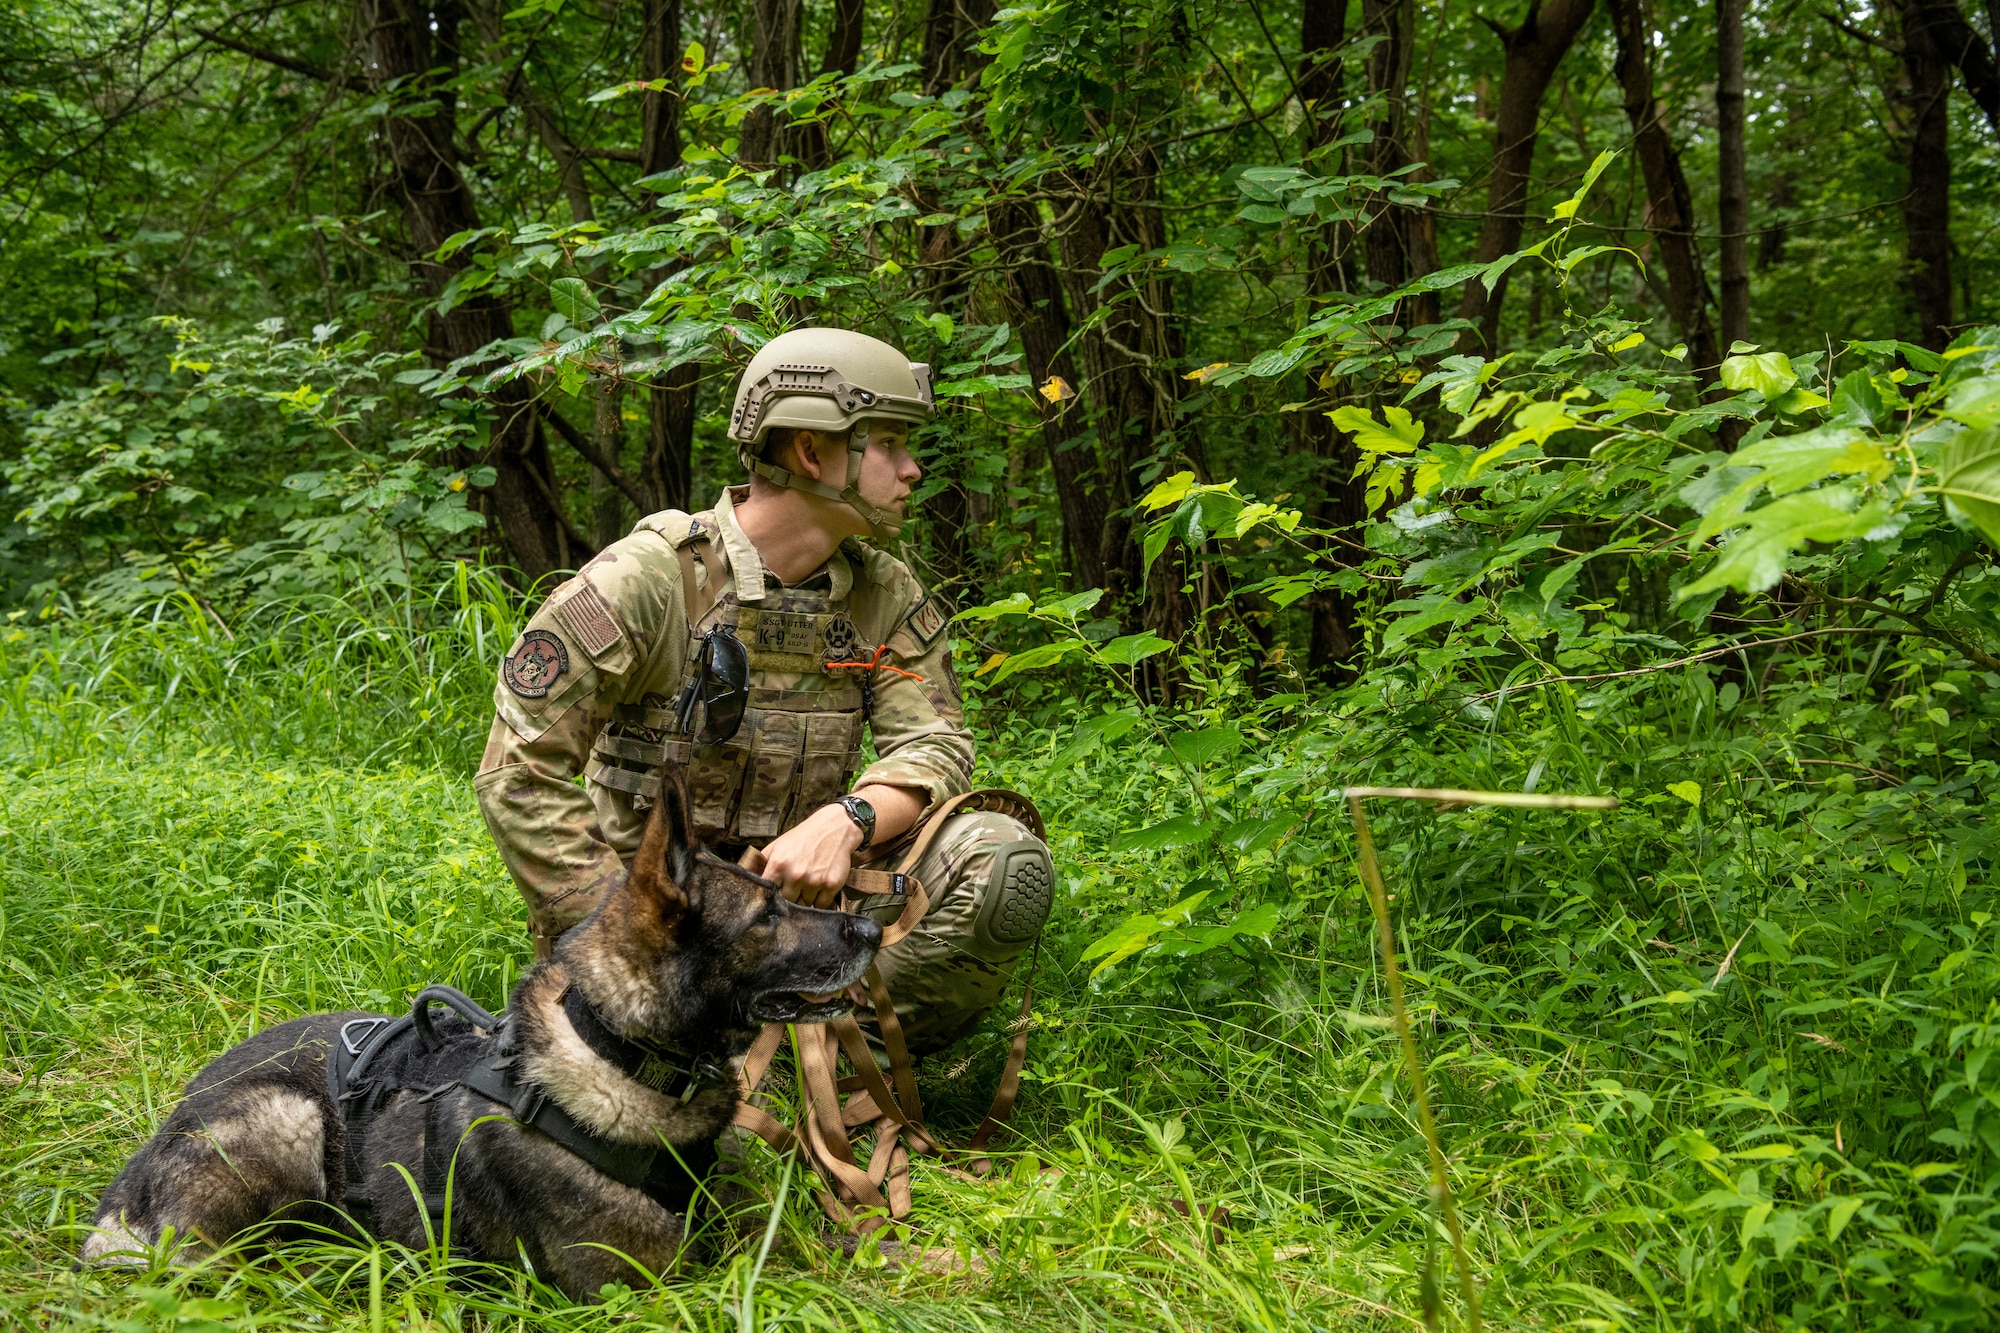 U.S. military member and a military working dog in tactical gear kneel next to bushes.